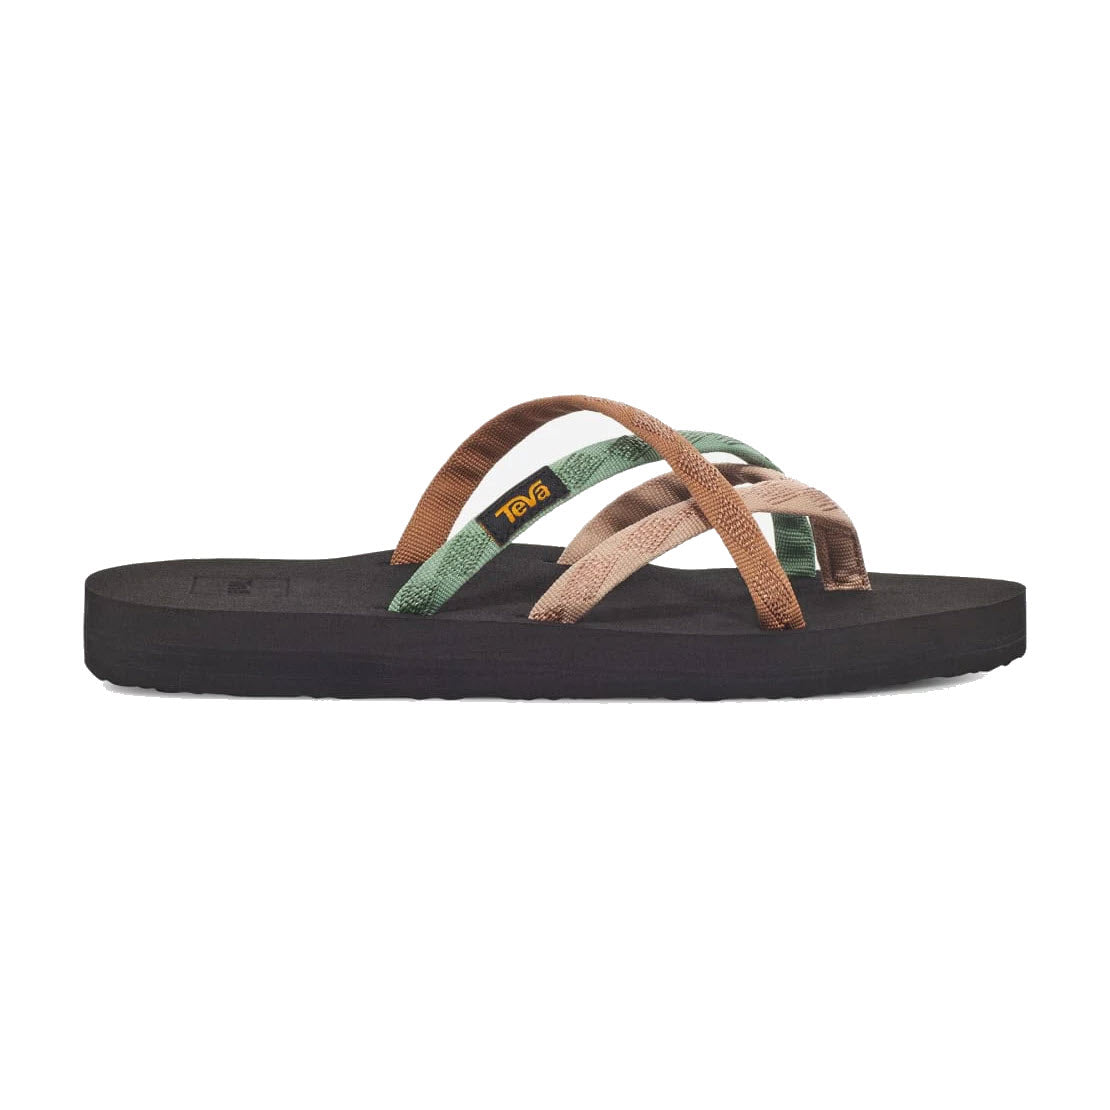 A pair of Teva Women’s TEVA OLOWAHU MAPLE SUGAR MULTI sandals with a black sole and multicolored straps in brown, green, and black, displaying a visible logo.